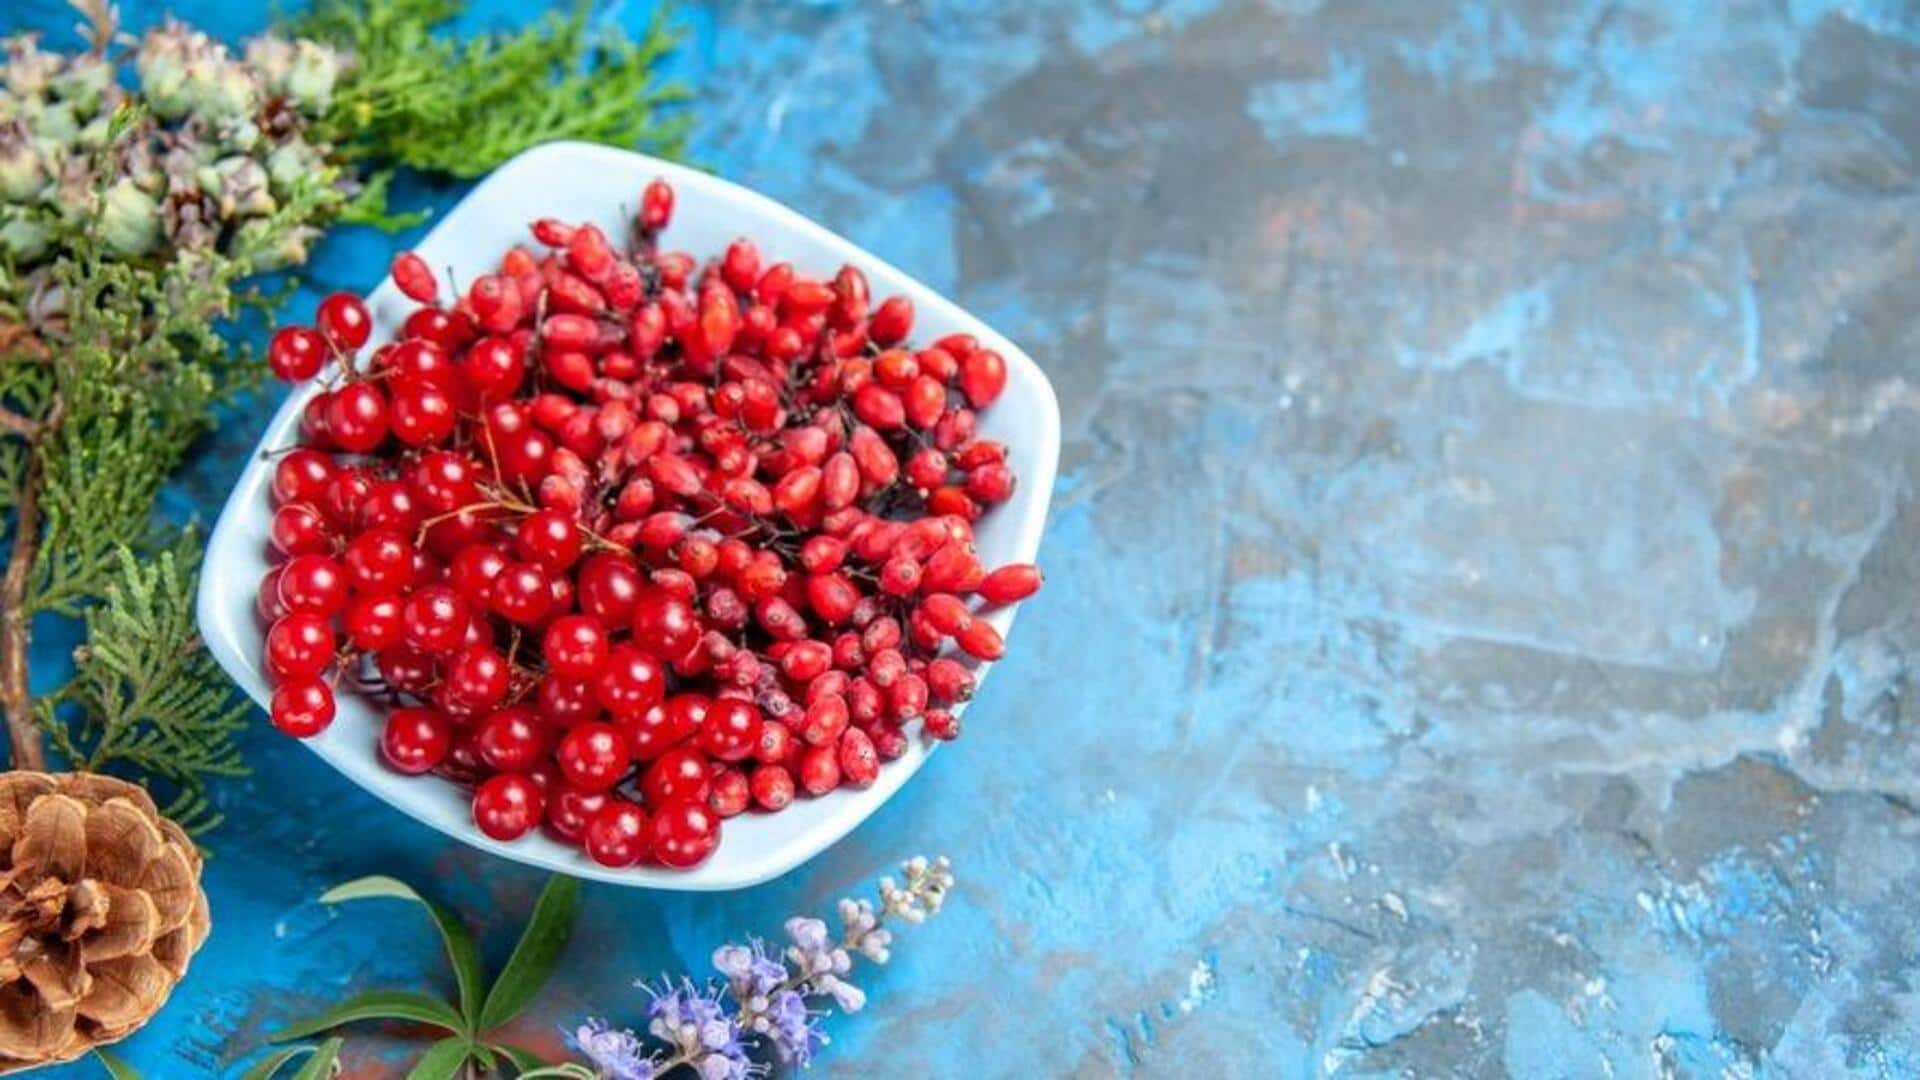 Did you know these skin-related benefits of bearberry extract